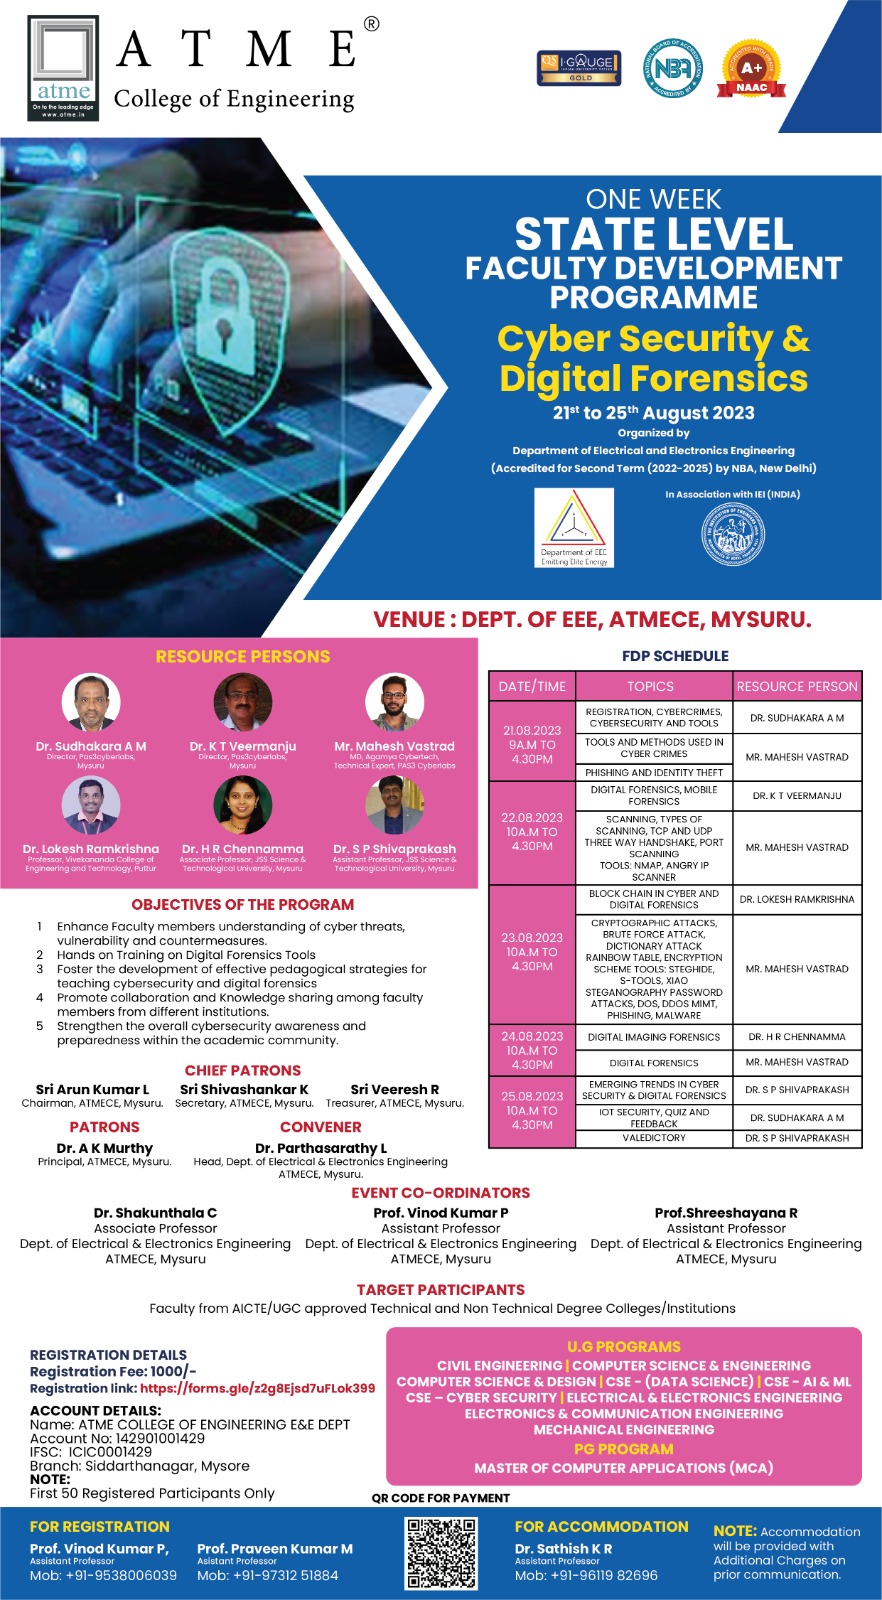 One Week State Level Faculty Development Programme on Cyber Security and Digital Forensics 2023